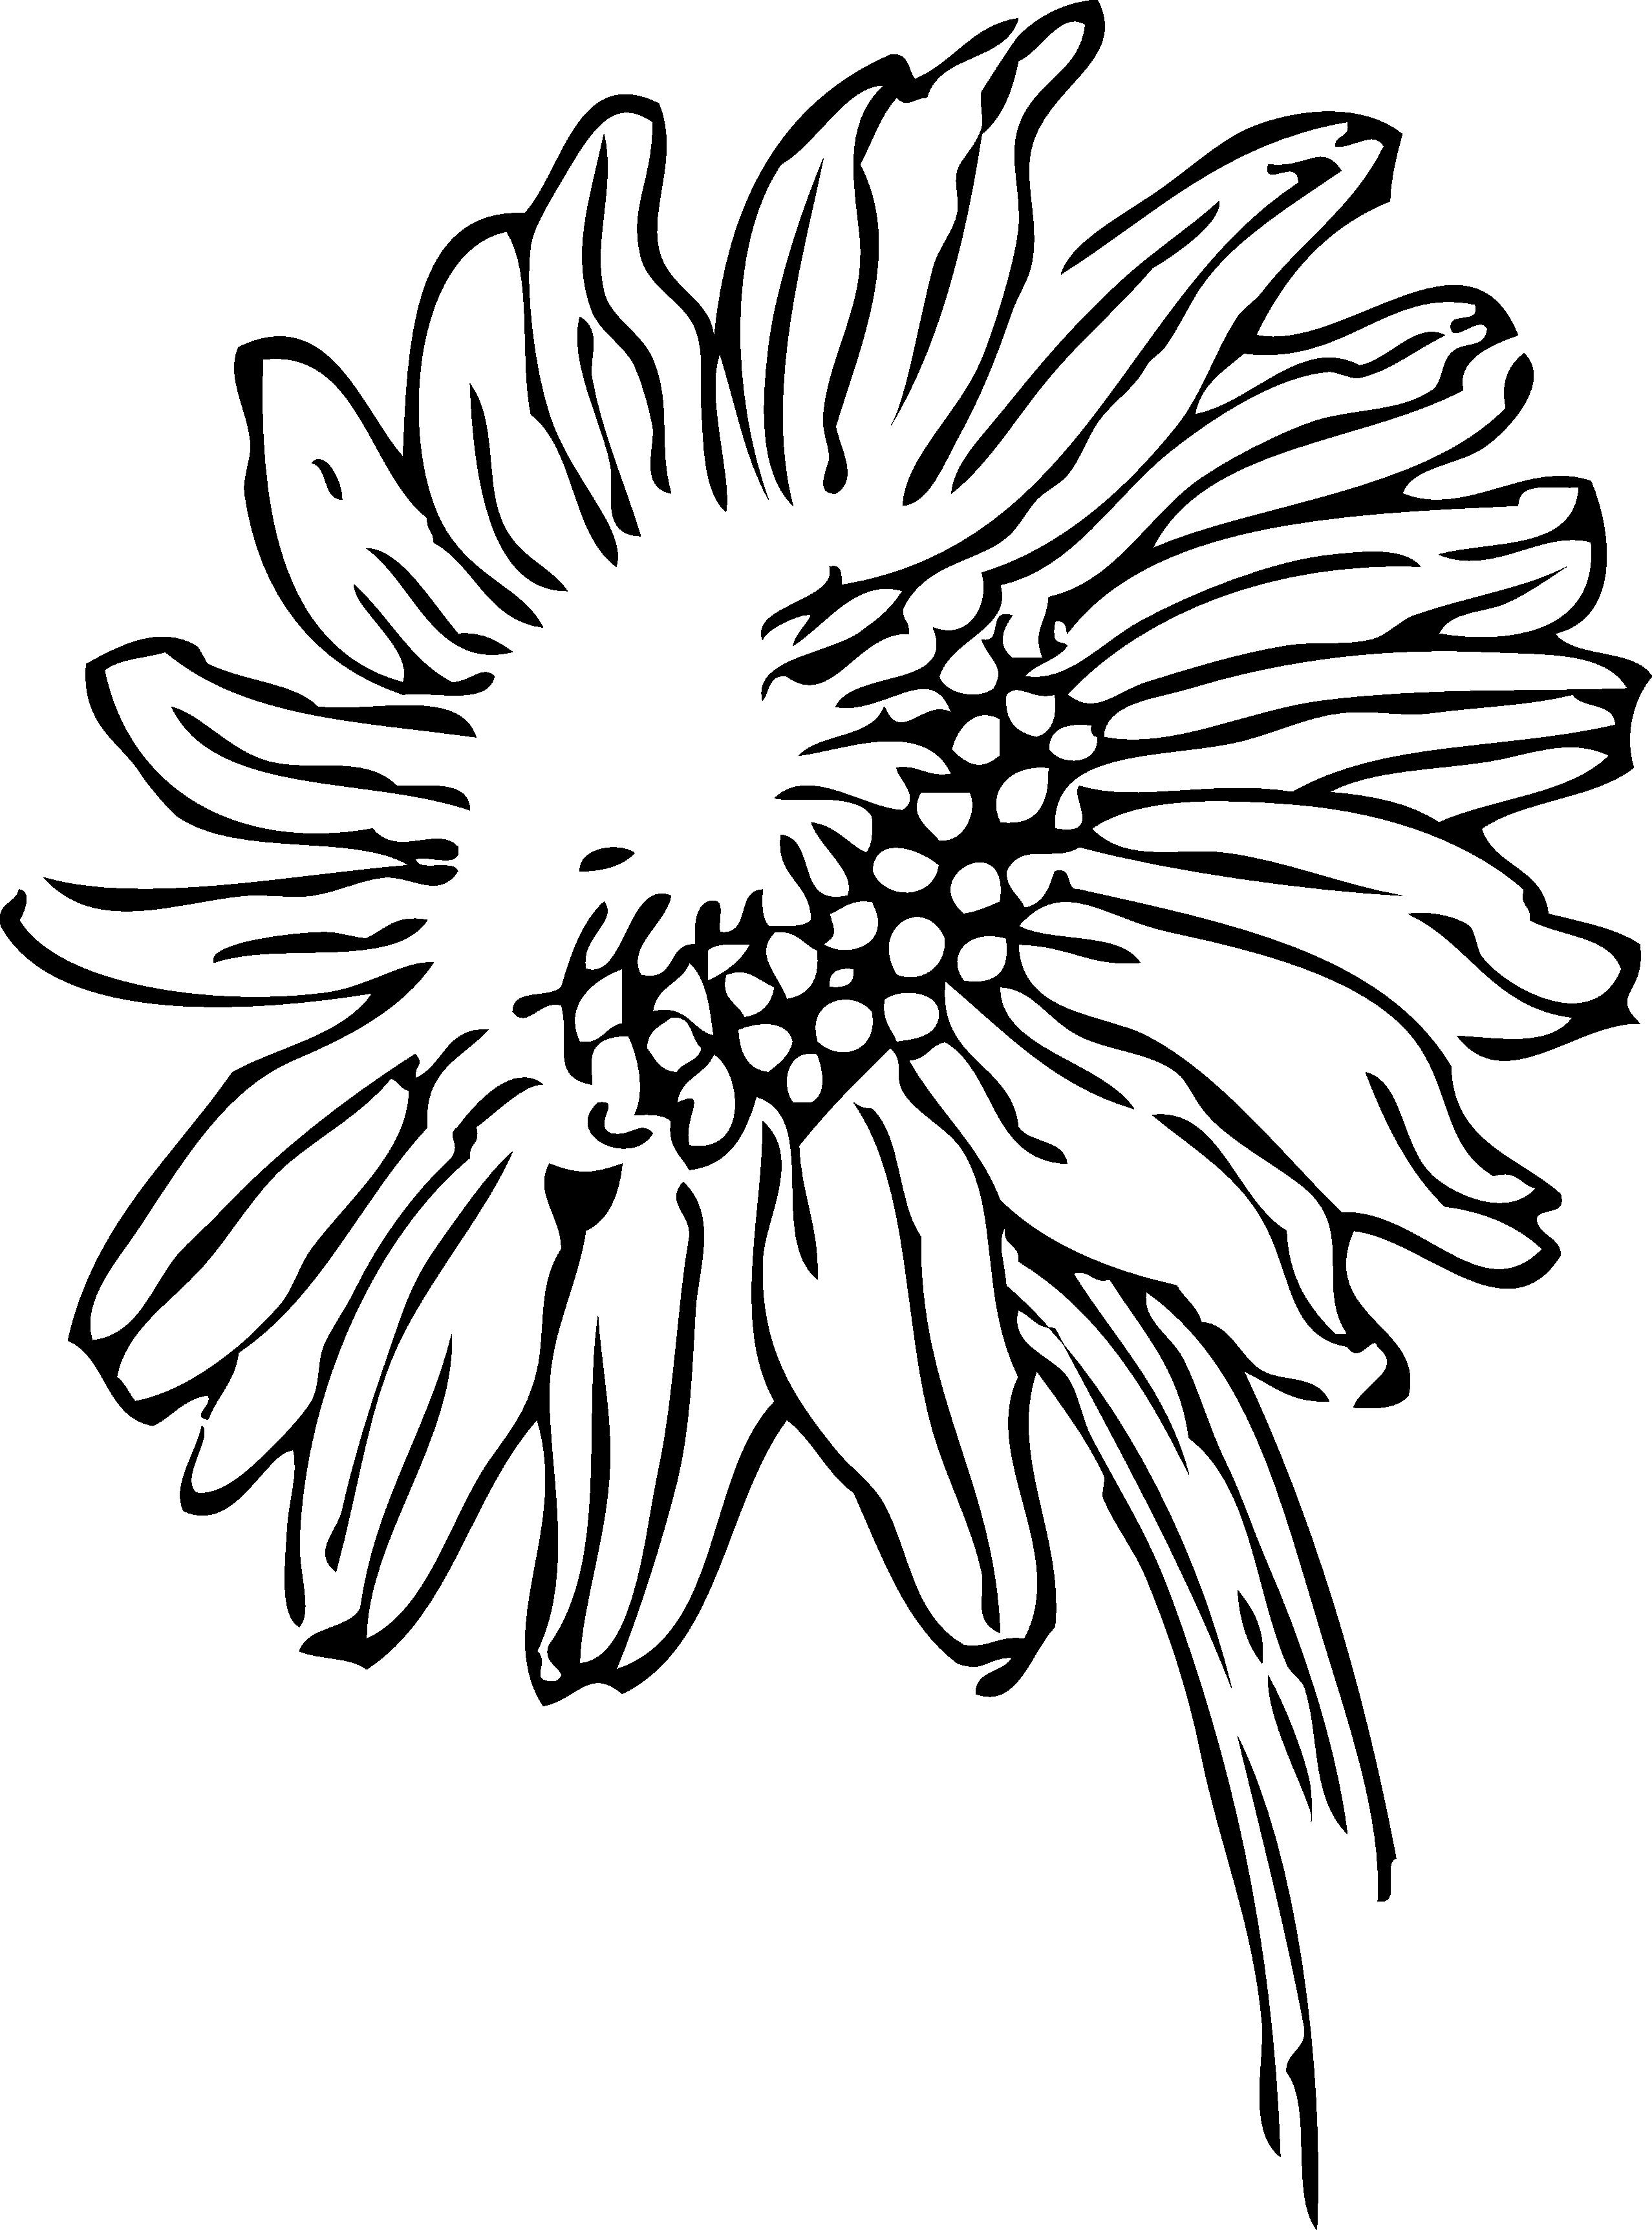 Sunflower Drawing Black And White